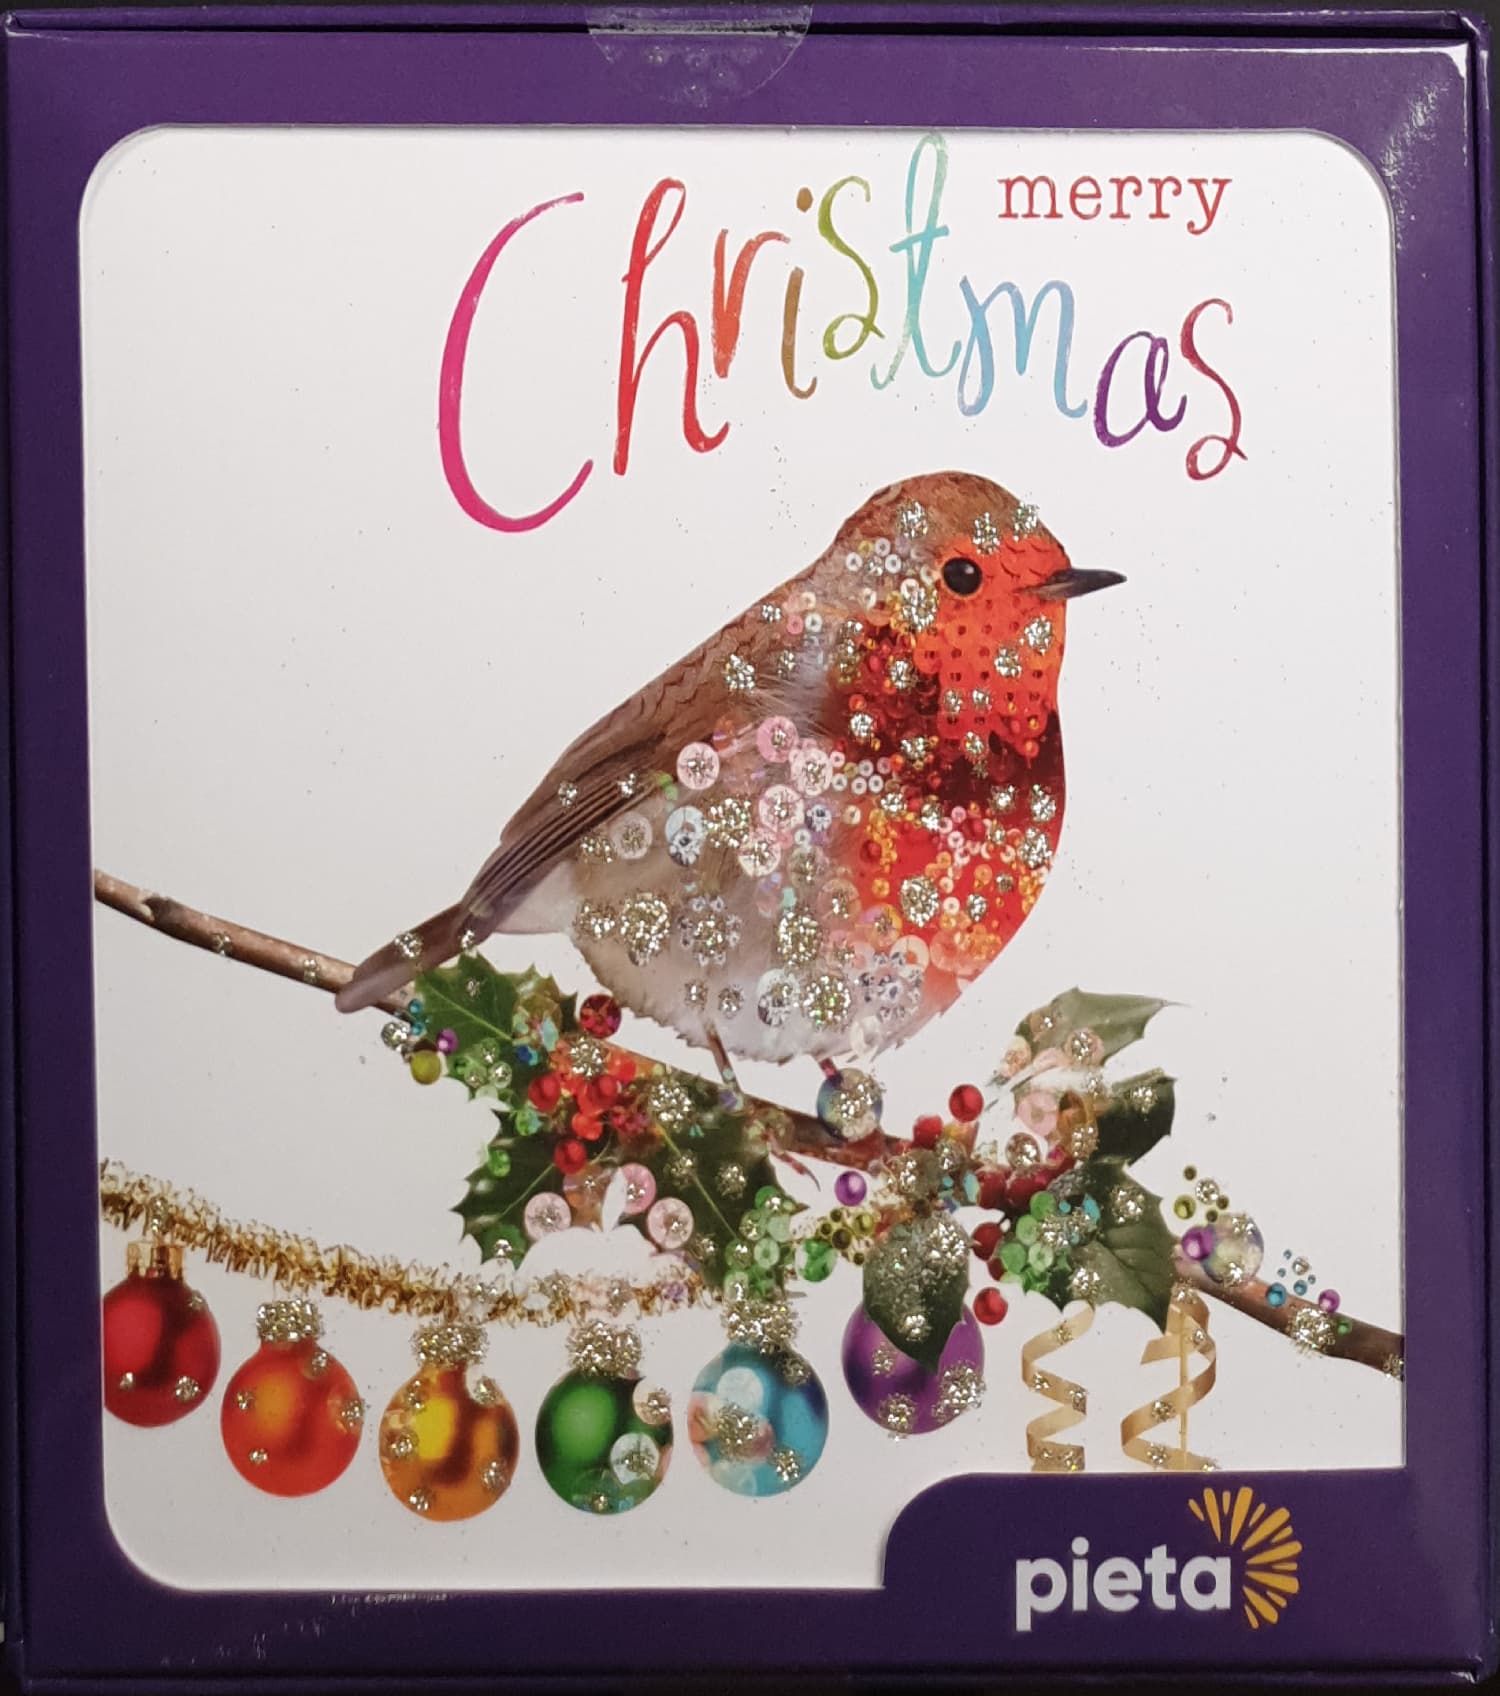 Charity Christmas Card (In Irish & English) - Box of 16 / Pieta - Sparkly Robin on Decorated Branch